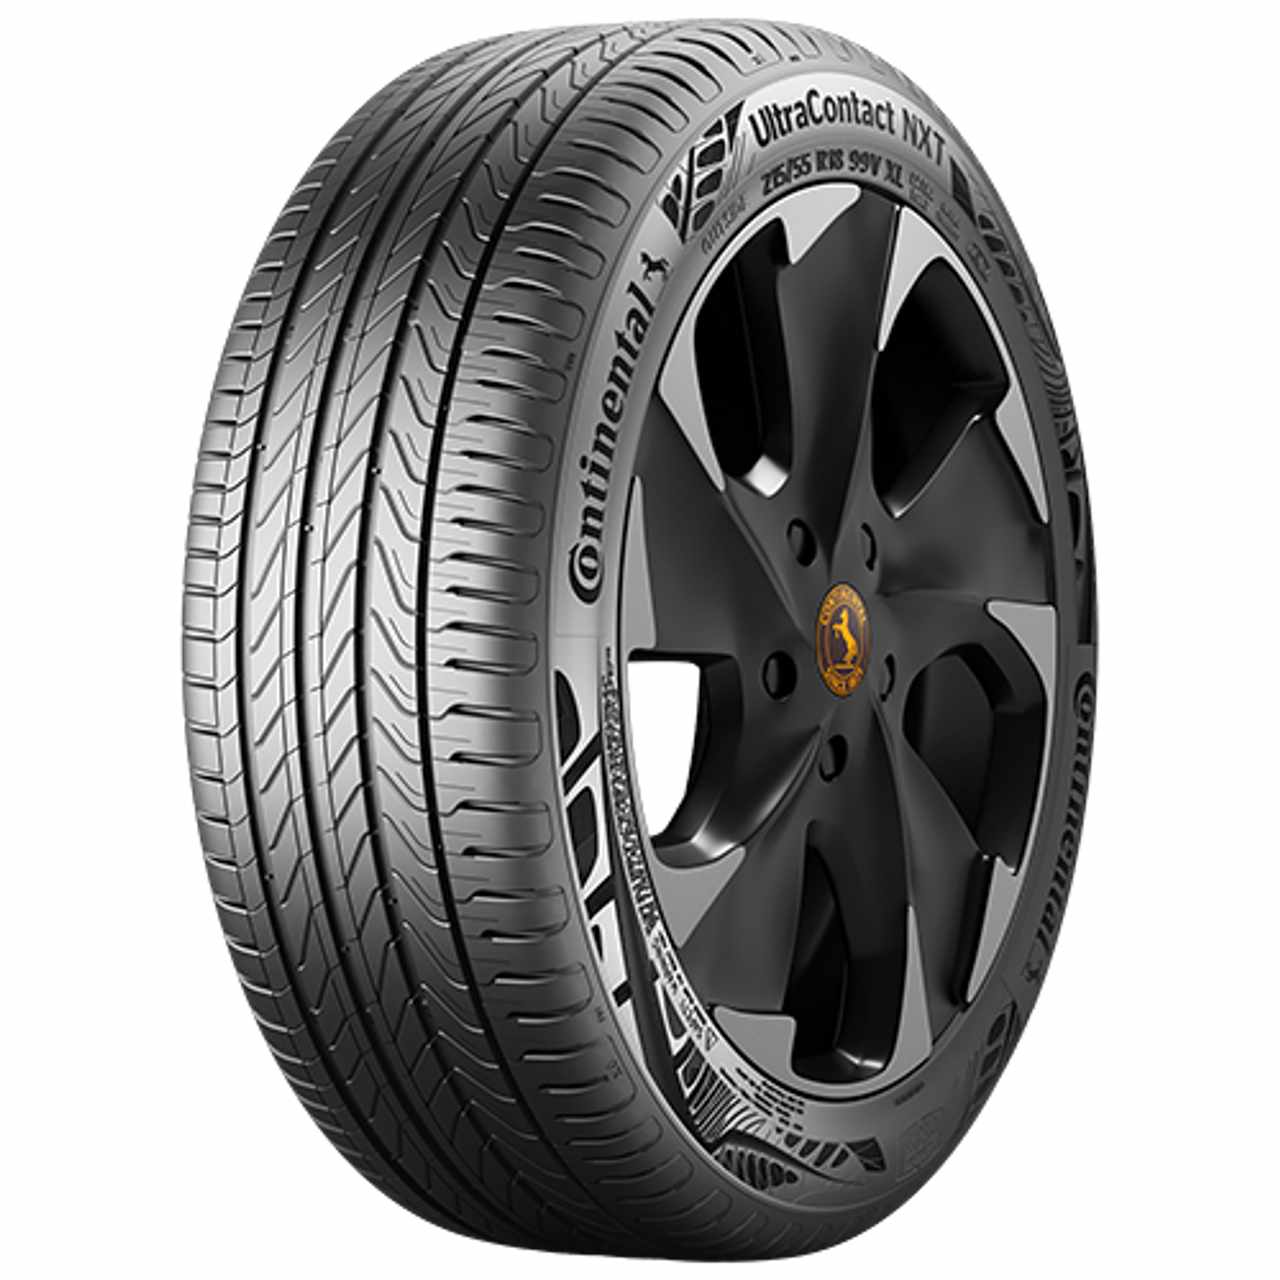 CONTINENTAL ULTRACONTACT NXT (EVc) 235/55R19 105T FR BSW von Continental